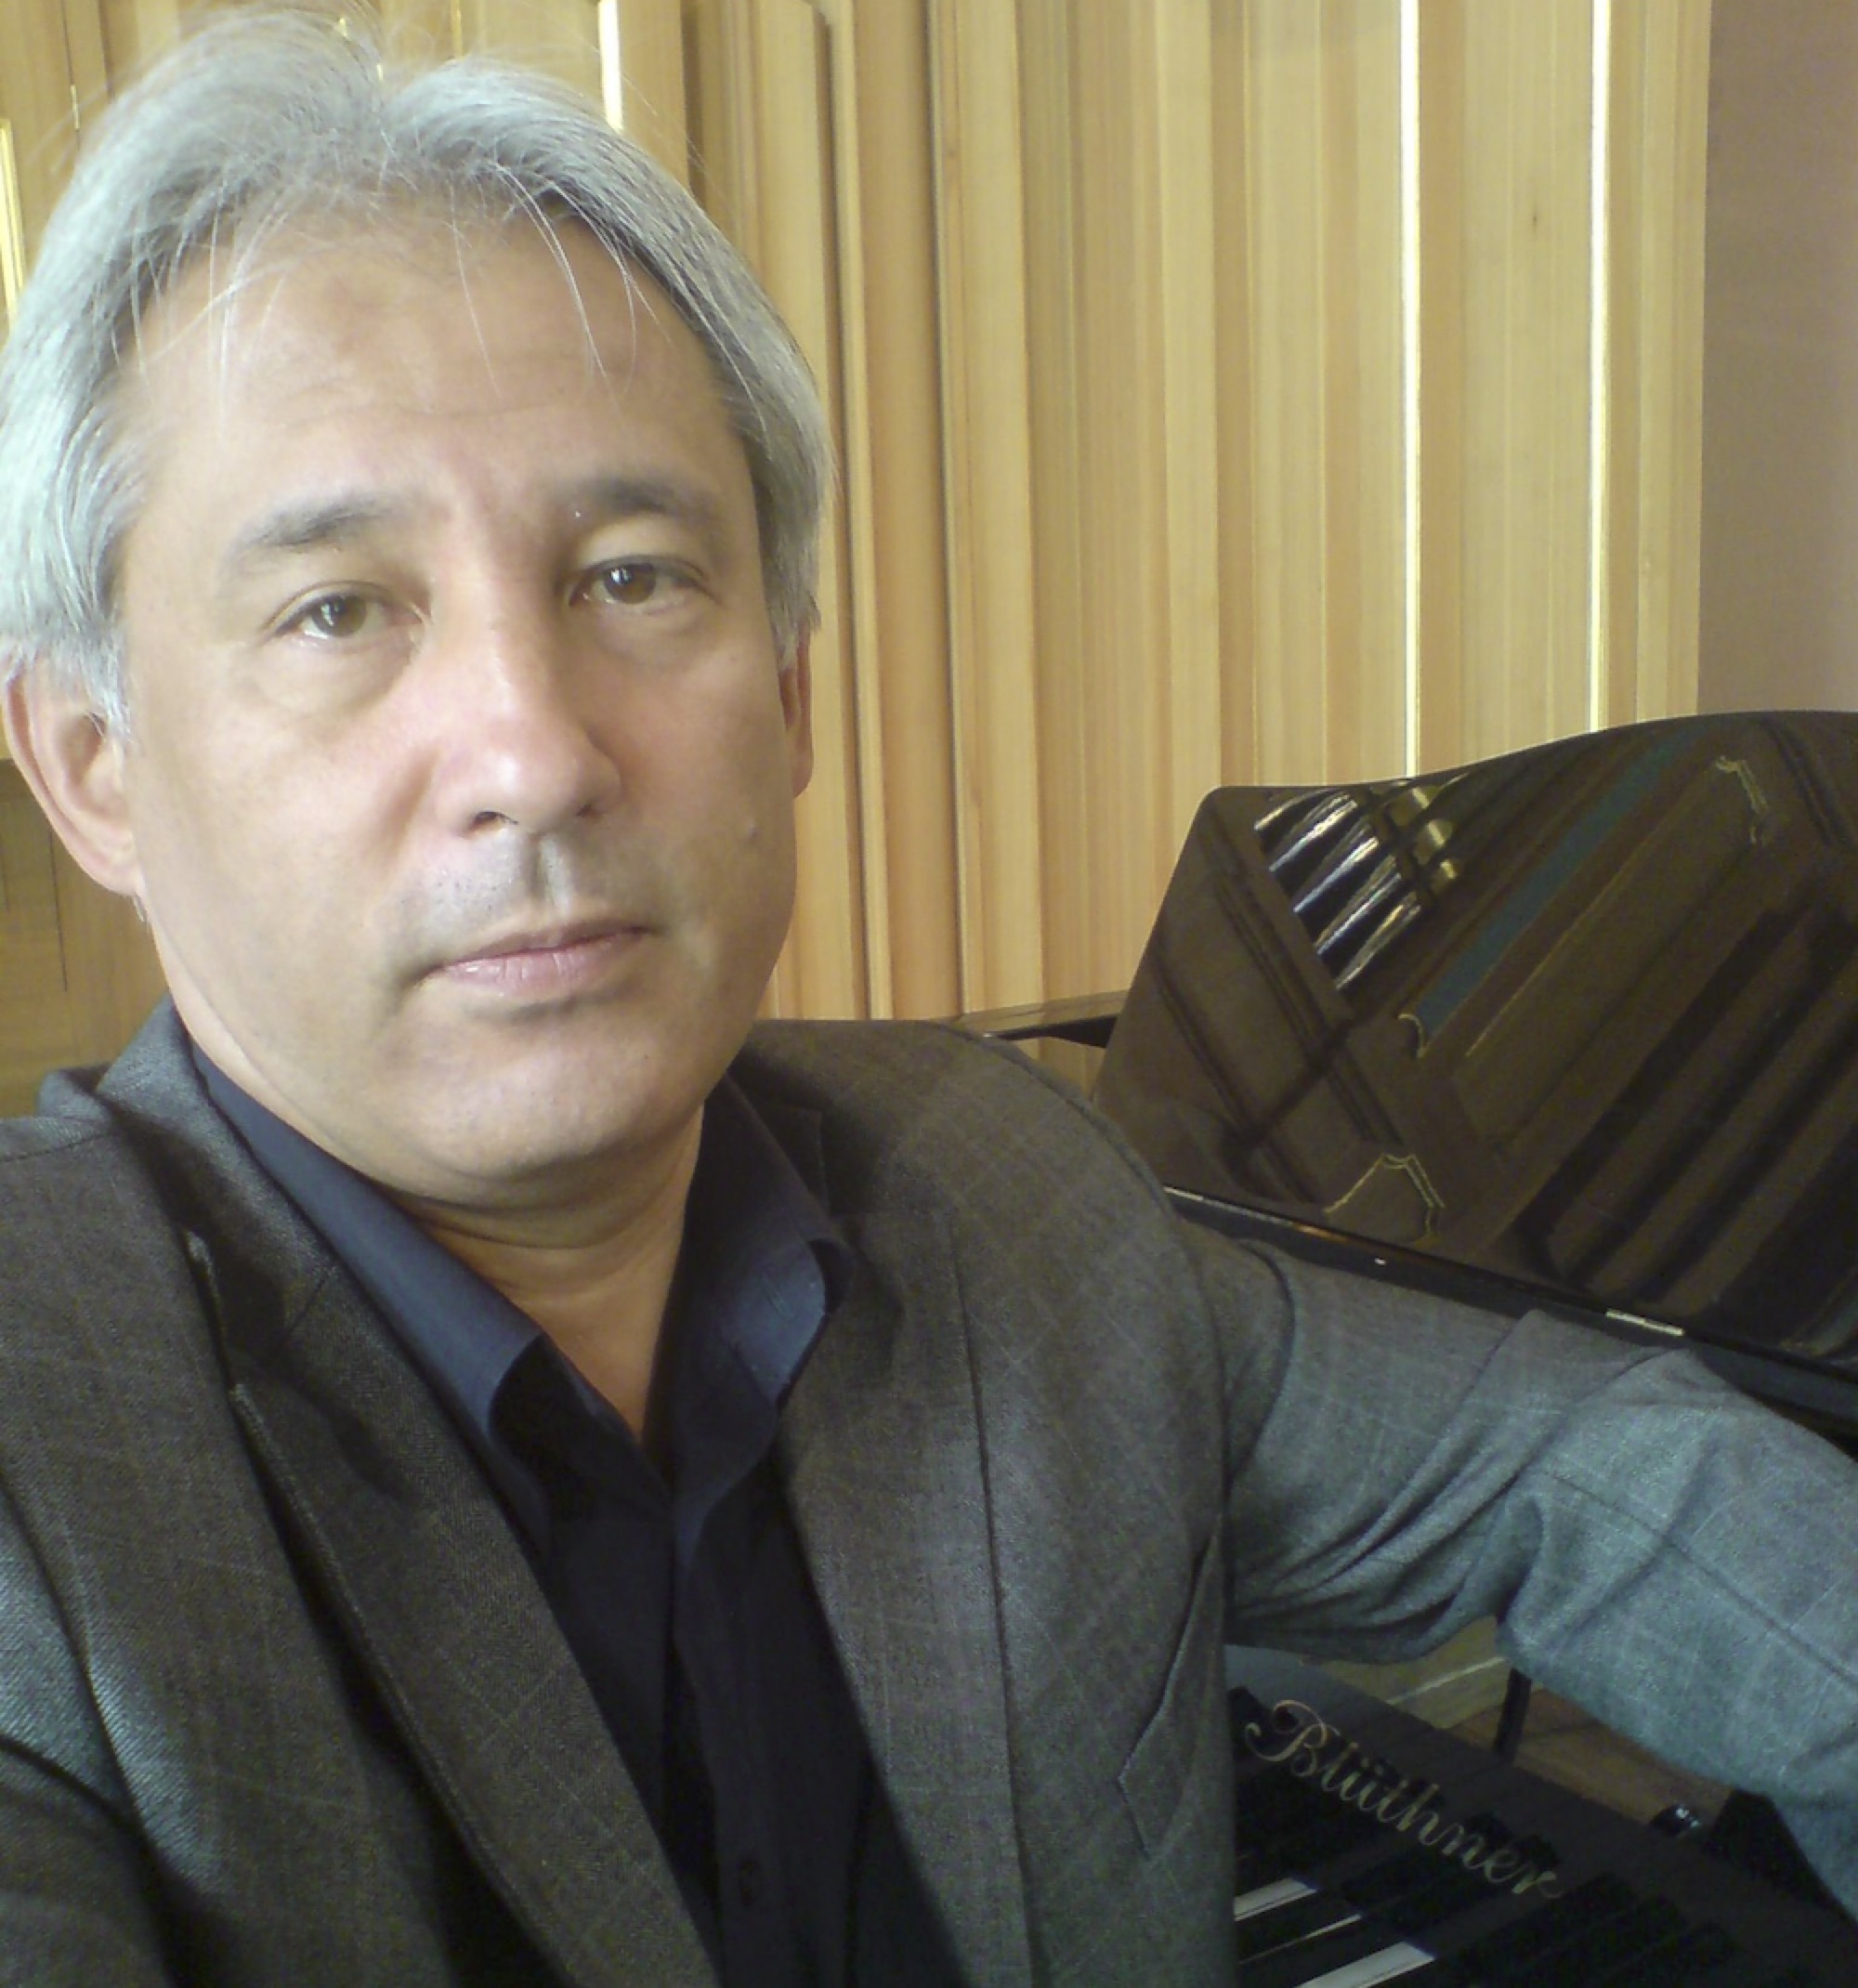 Read more about the article Performing Ligeti’s “Hungarian Rock” on a piano.